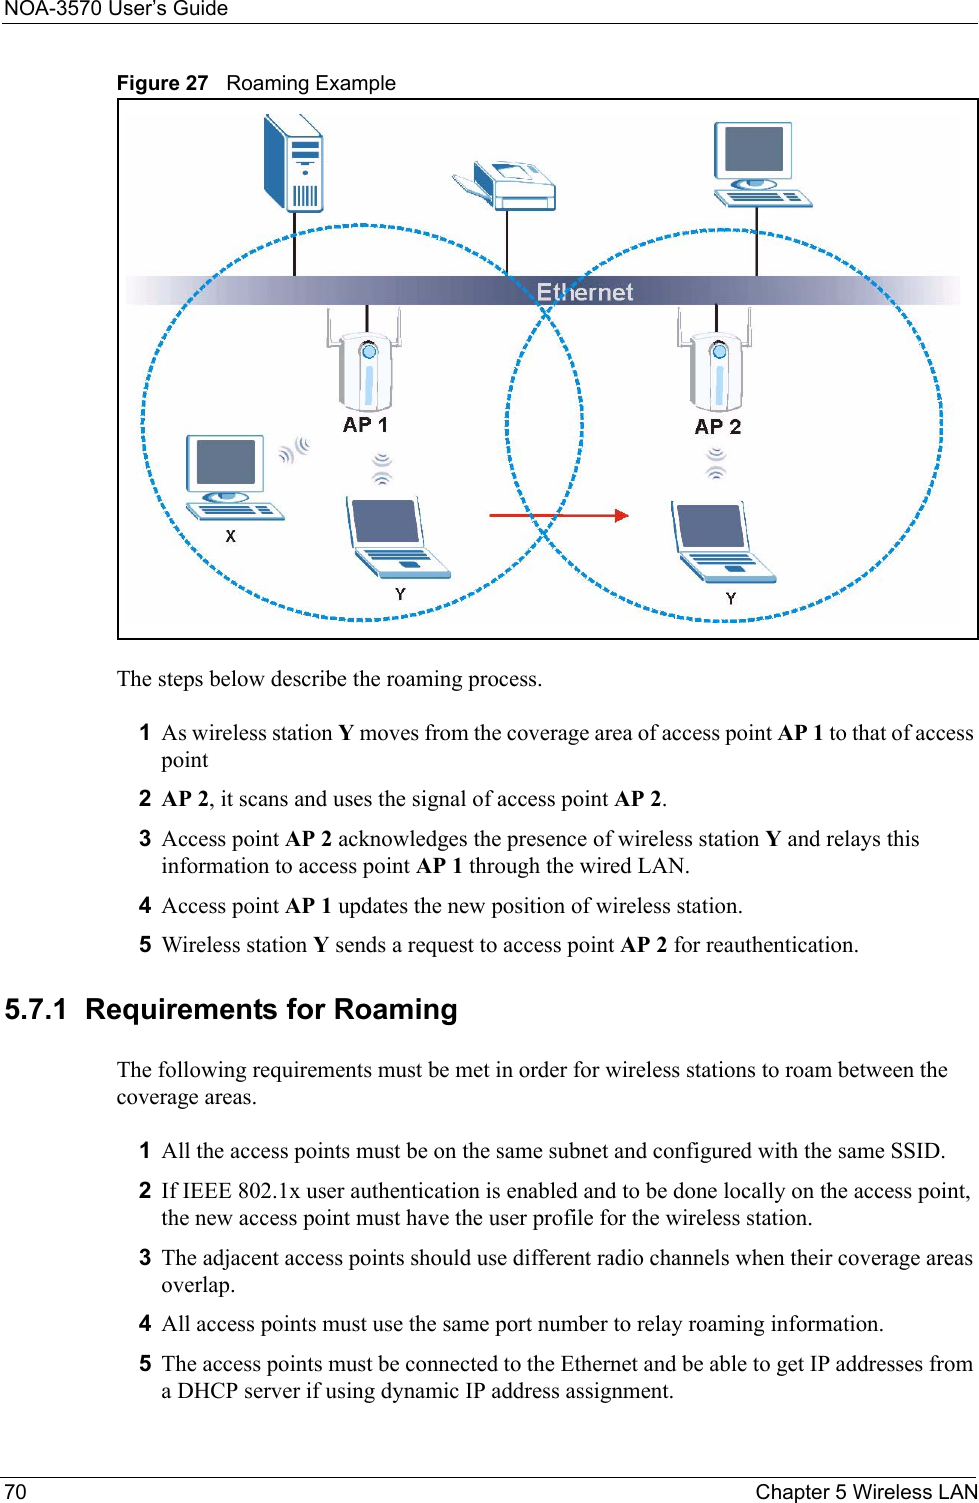 NOA-3570 User’s Guide70 Chapter 5 Wireless LANFigure 27   Roaming ExampleThe steps below describe the roaming process.1As wireless station Y moves from the coverage area of access point AP 1 to that of access point 2AP 2, it scans and uses the signal of access point AP 2. 3Access point AP 2 acknowledges the presence of wireless station Y and relays this information to access point AP 1 through the wired LAN. 4Access point AP 1 updates the new position of wireless station.5Wireless station Y sends a request to access point AP 2 for reauthentication.5.7.1  Requirements for RoamingThe following requirements must be met in order for wireless stations to roam between the coverage areas. 1All the access points must be on the same subnet and configured with the same SSID. 2If IEEE 802.1x user authentication is enabled and to be done locally on the access point, the new access point must have the user profile for the wireless station.3The adjacent access points should use different radio channels when their coverage areas overlap. 4All access points must use the same port number to relay roaming information. 5The access points must be connected to the Ethernet and be able to get IP addresses from a DHCP server if using dynamic IP address assignment. 